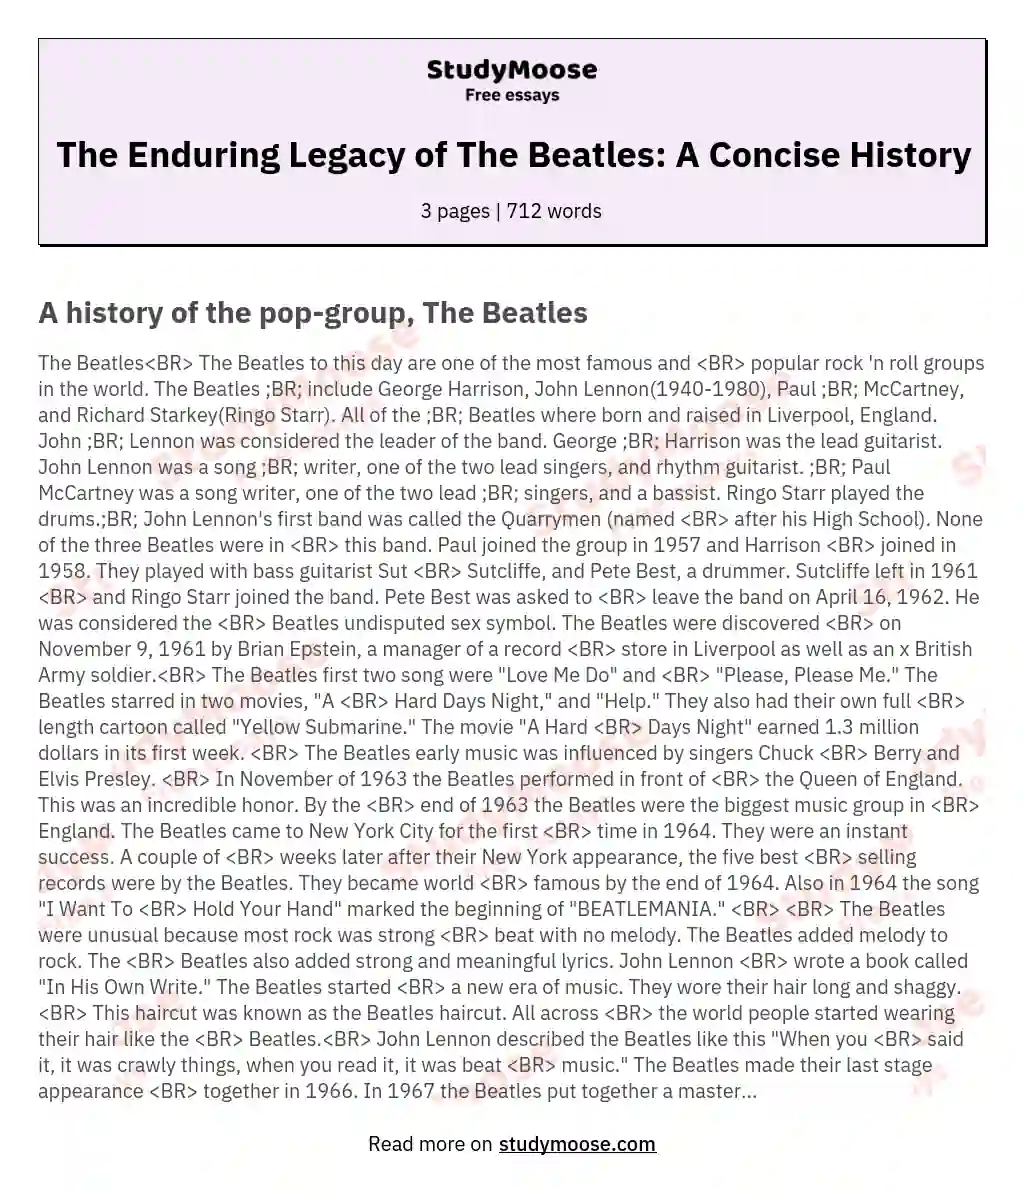 The Enduring Legacy of The Beatles: A Concise History essay